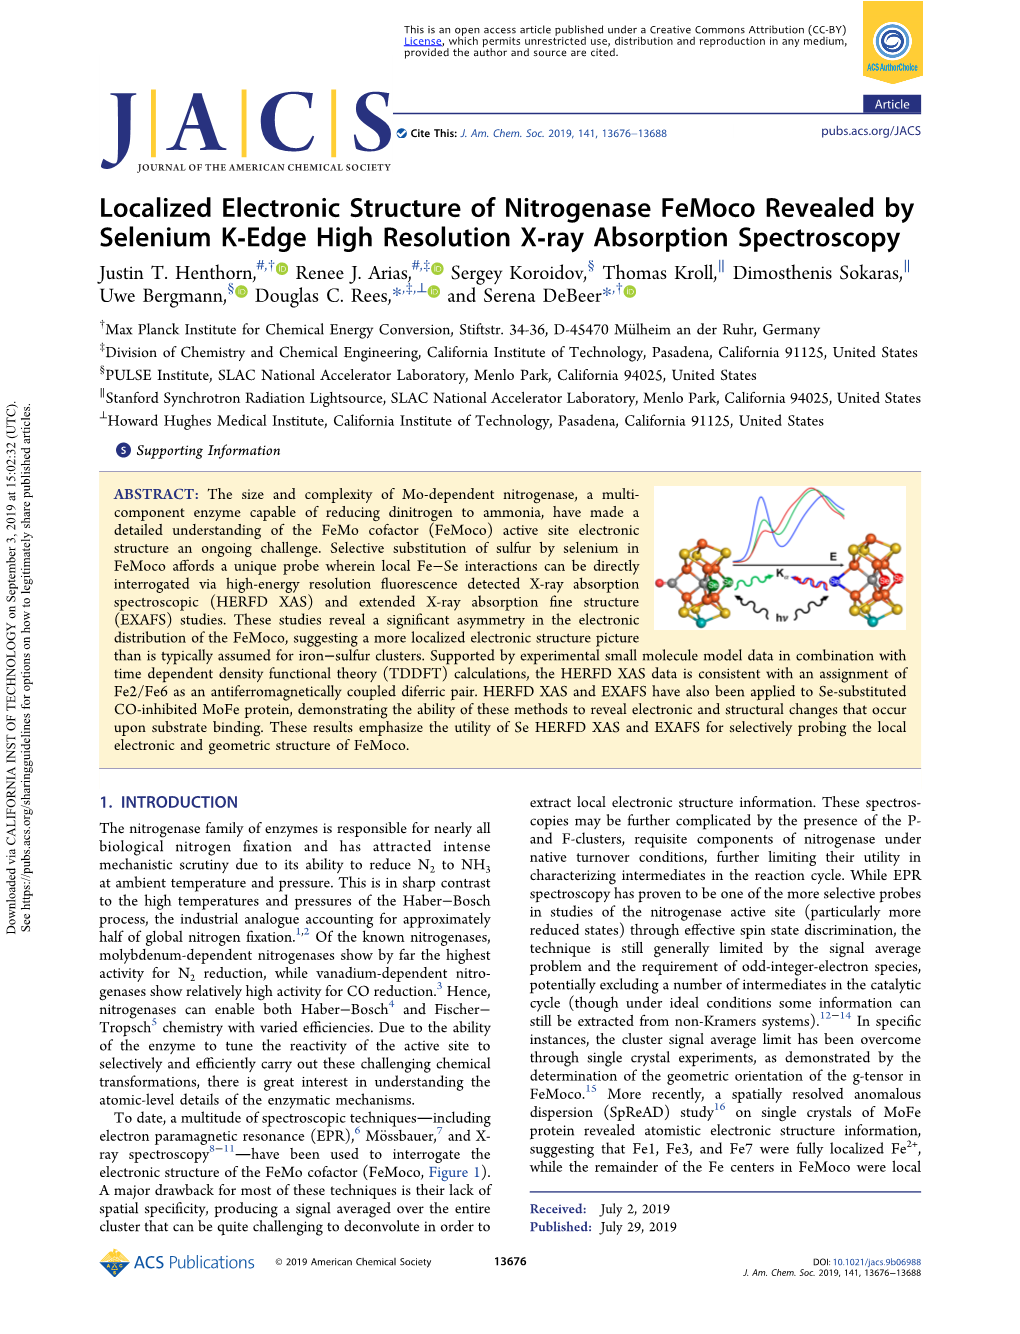 Localized Electronic Structure of Nitrogenase Femoco Revealed by Selenium K‑Edge High Resolution X‑Ray Absorption Spectroscopy # † # ‡ § ∥ ∥ Justin T